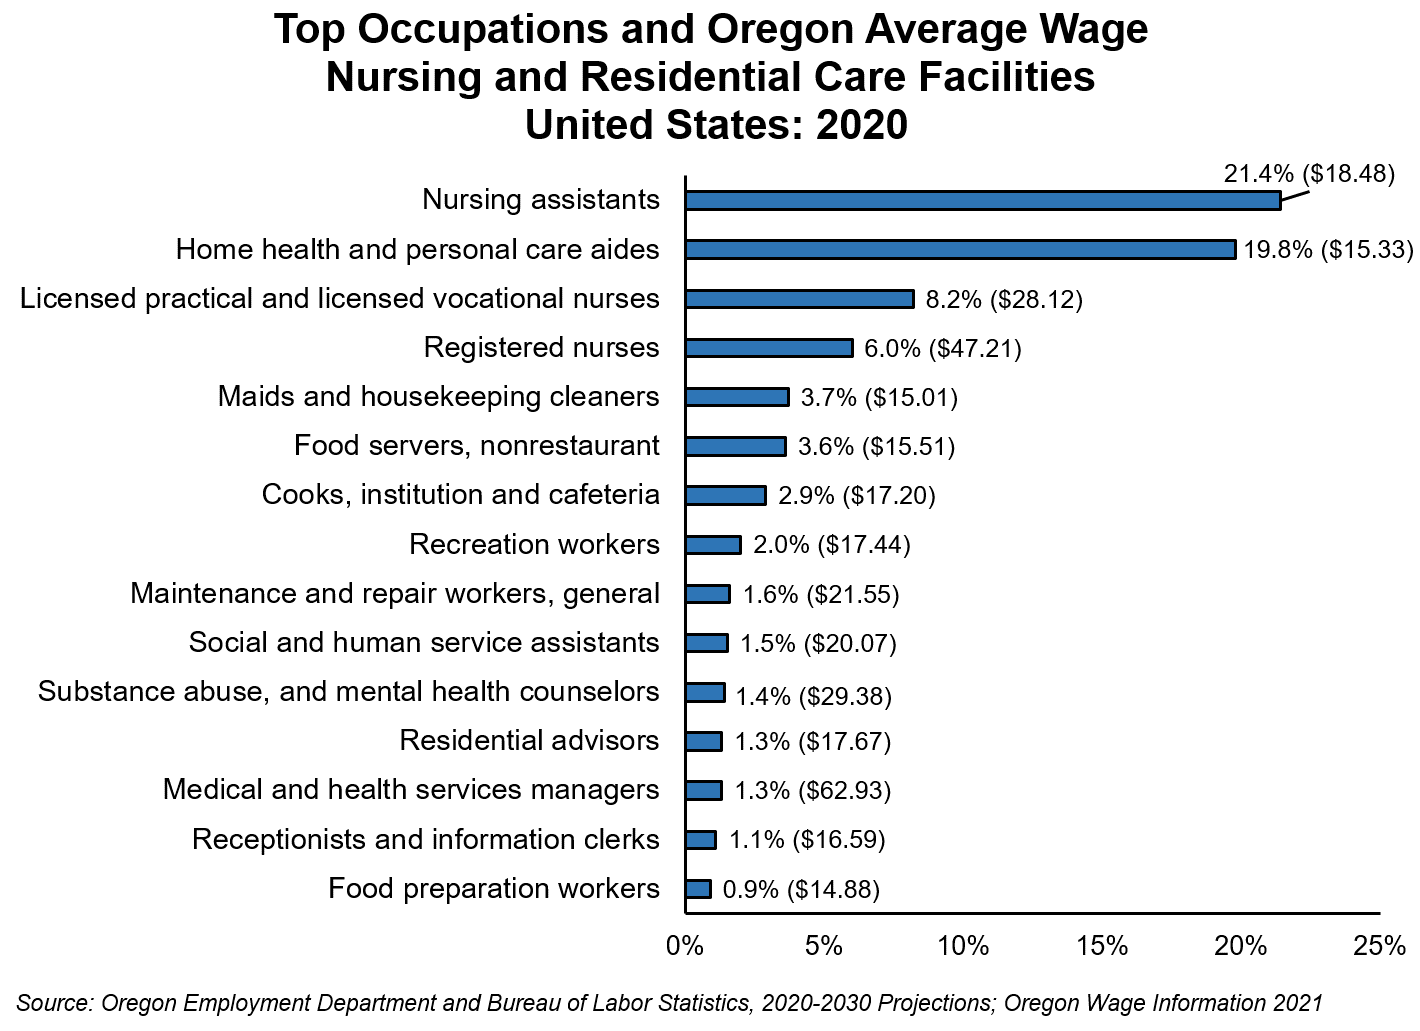 Graph showing top occupations and Oregon average wage, nursing and residential care facilities, United States: 2020